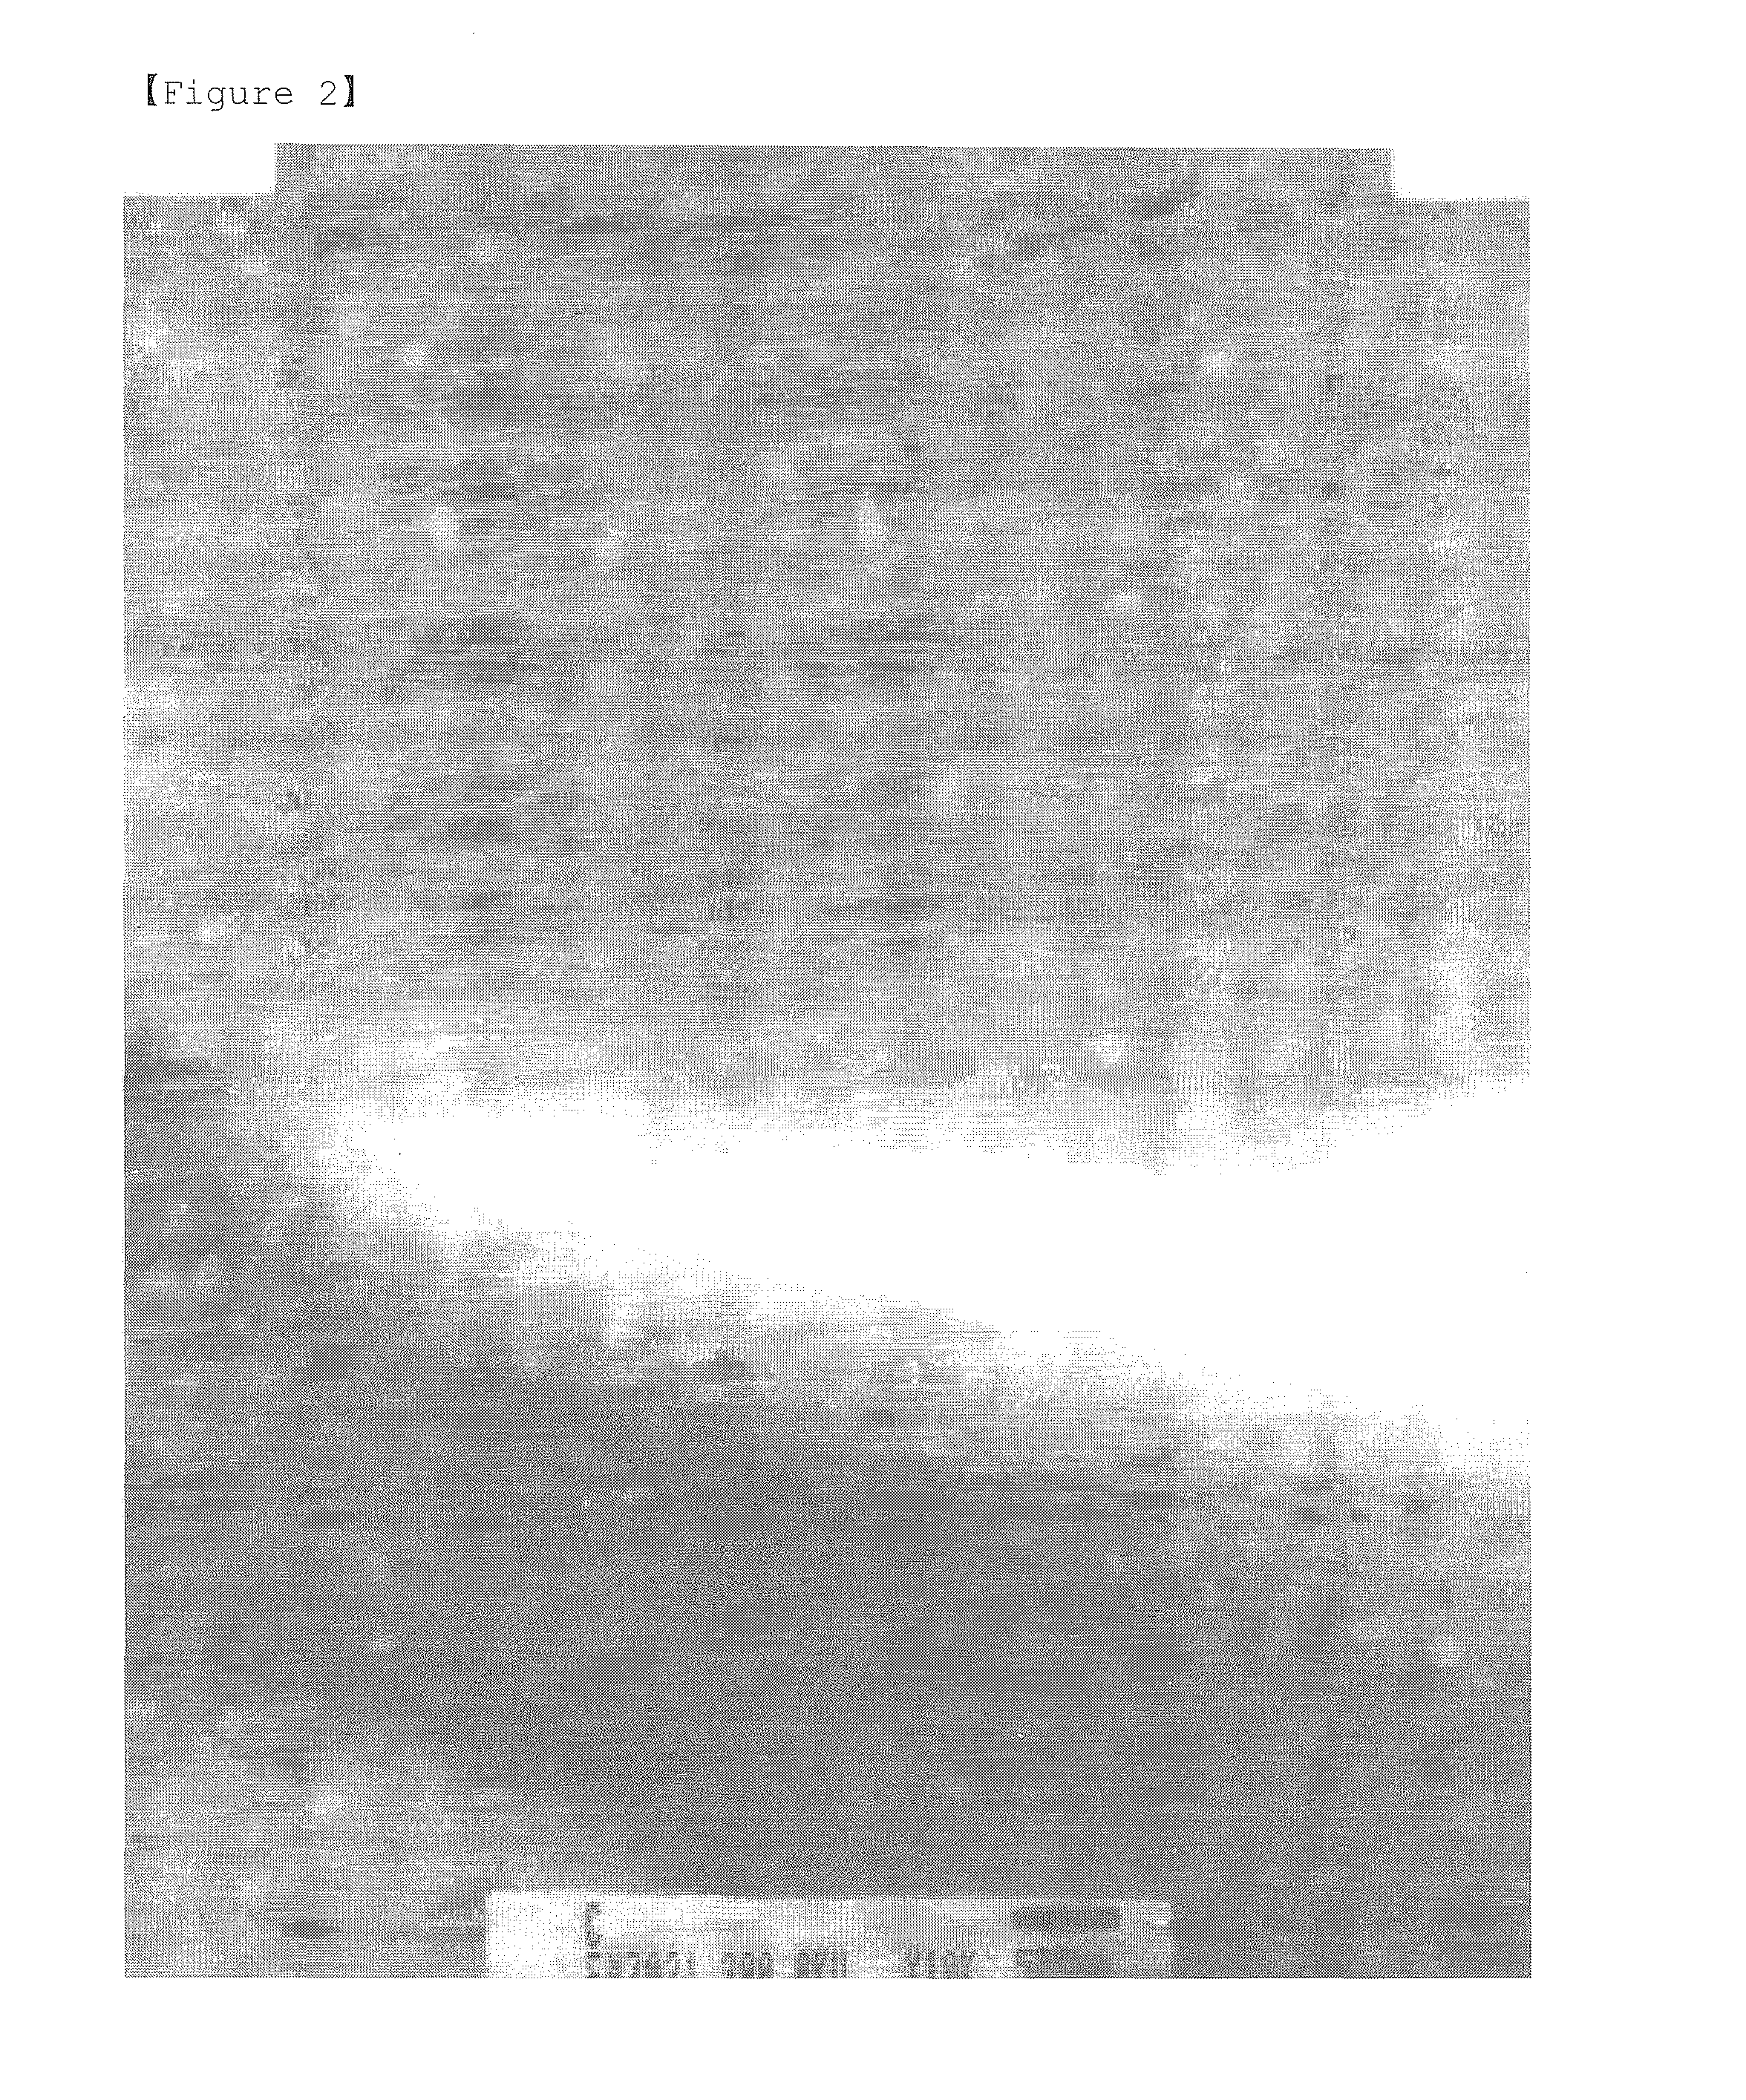 Method for Preparing Resin Compositions Containing Nano Silver Particles